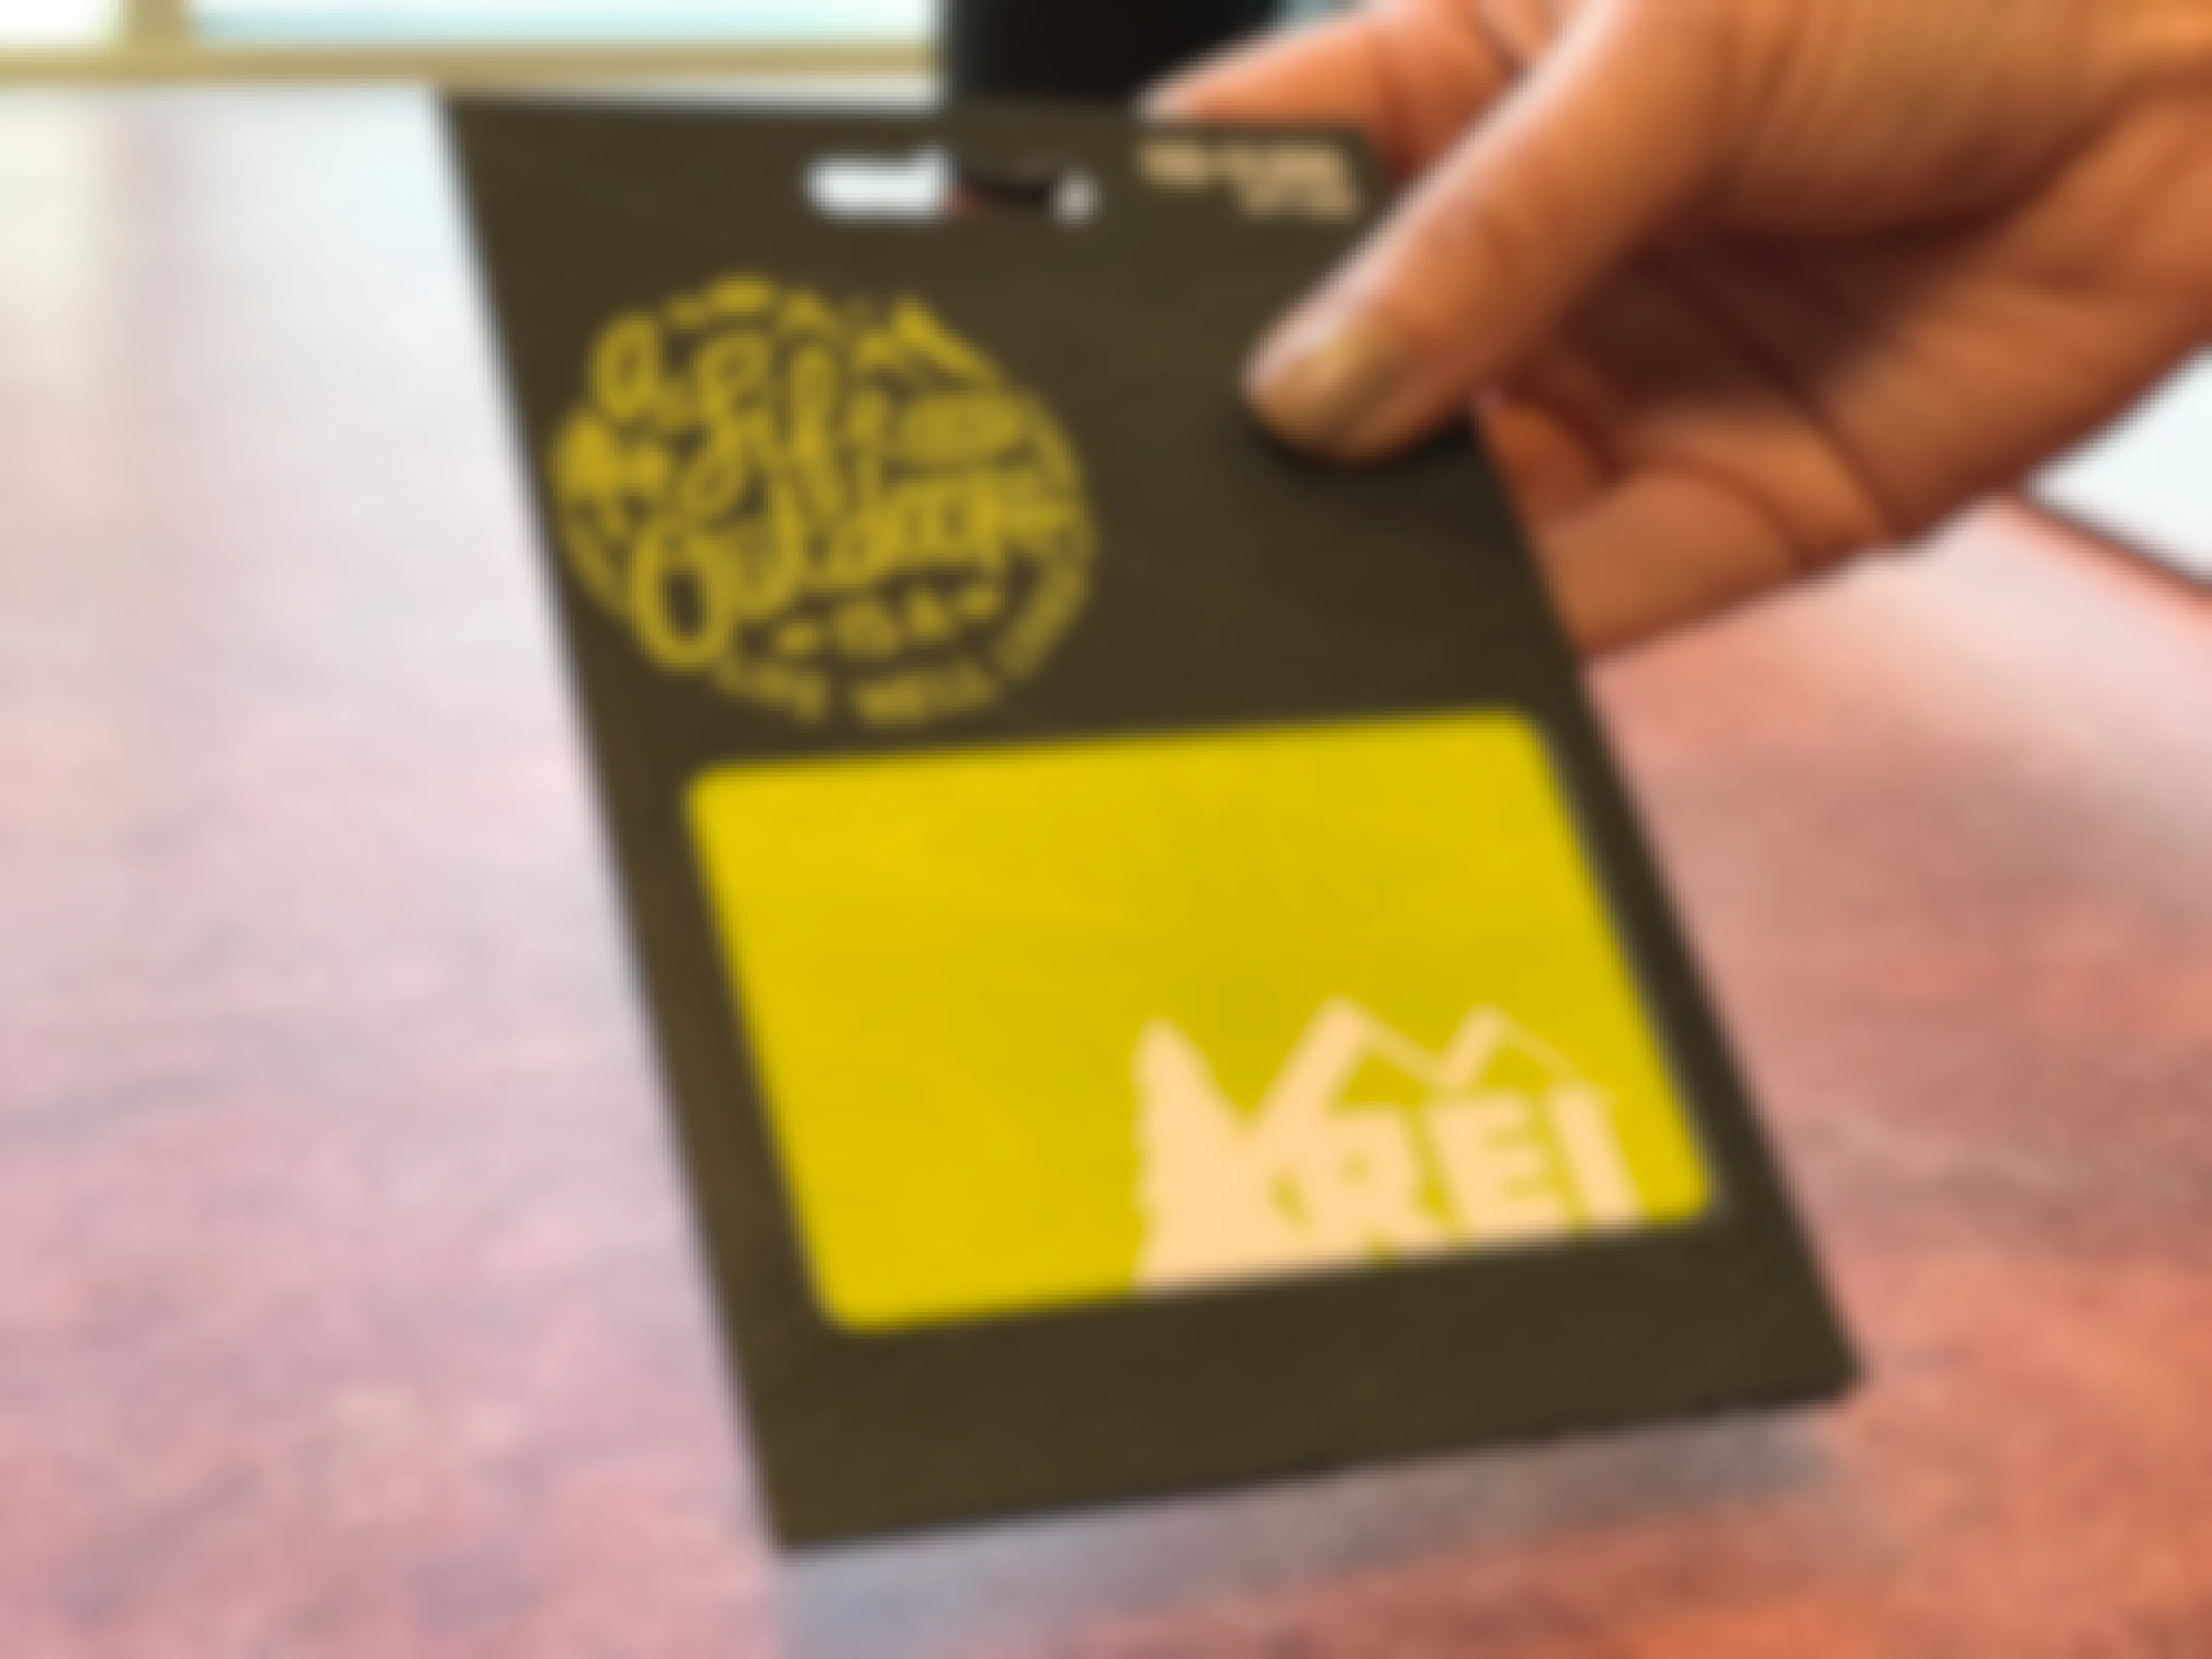 earn free gift cards - A person holding an REI gift card.